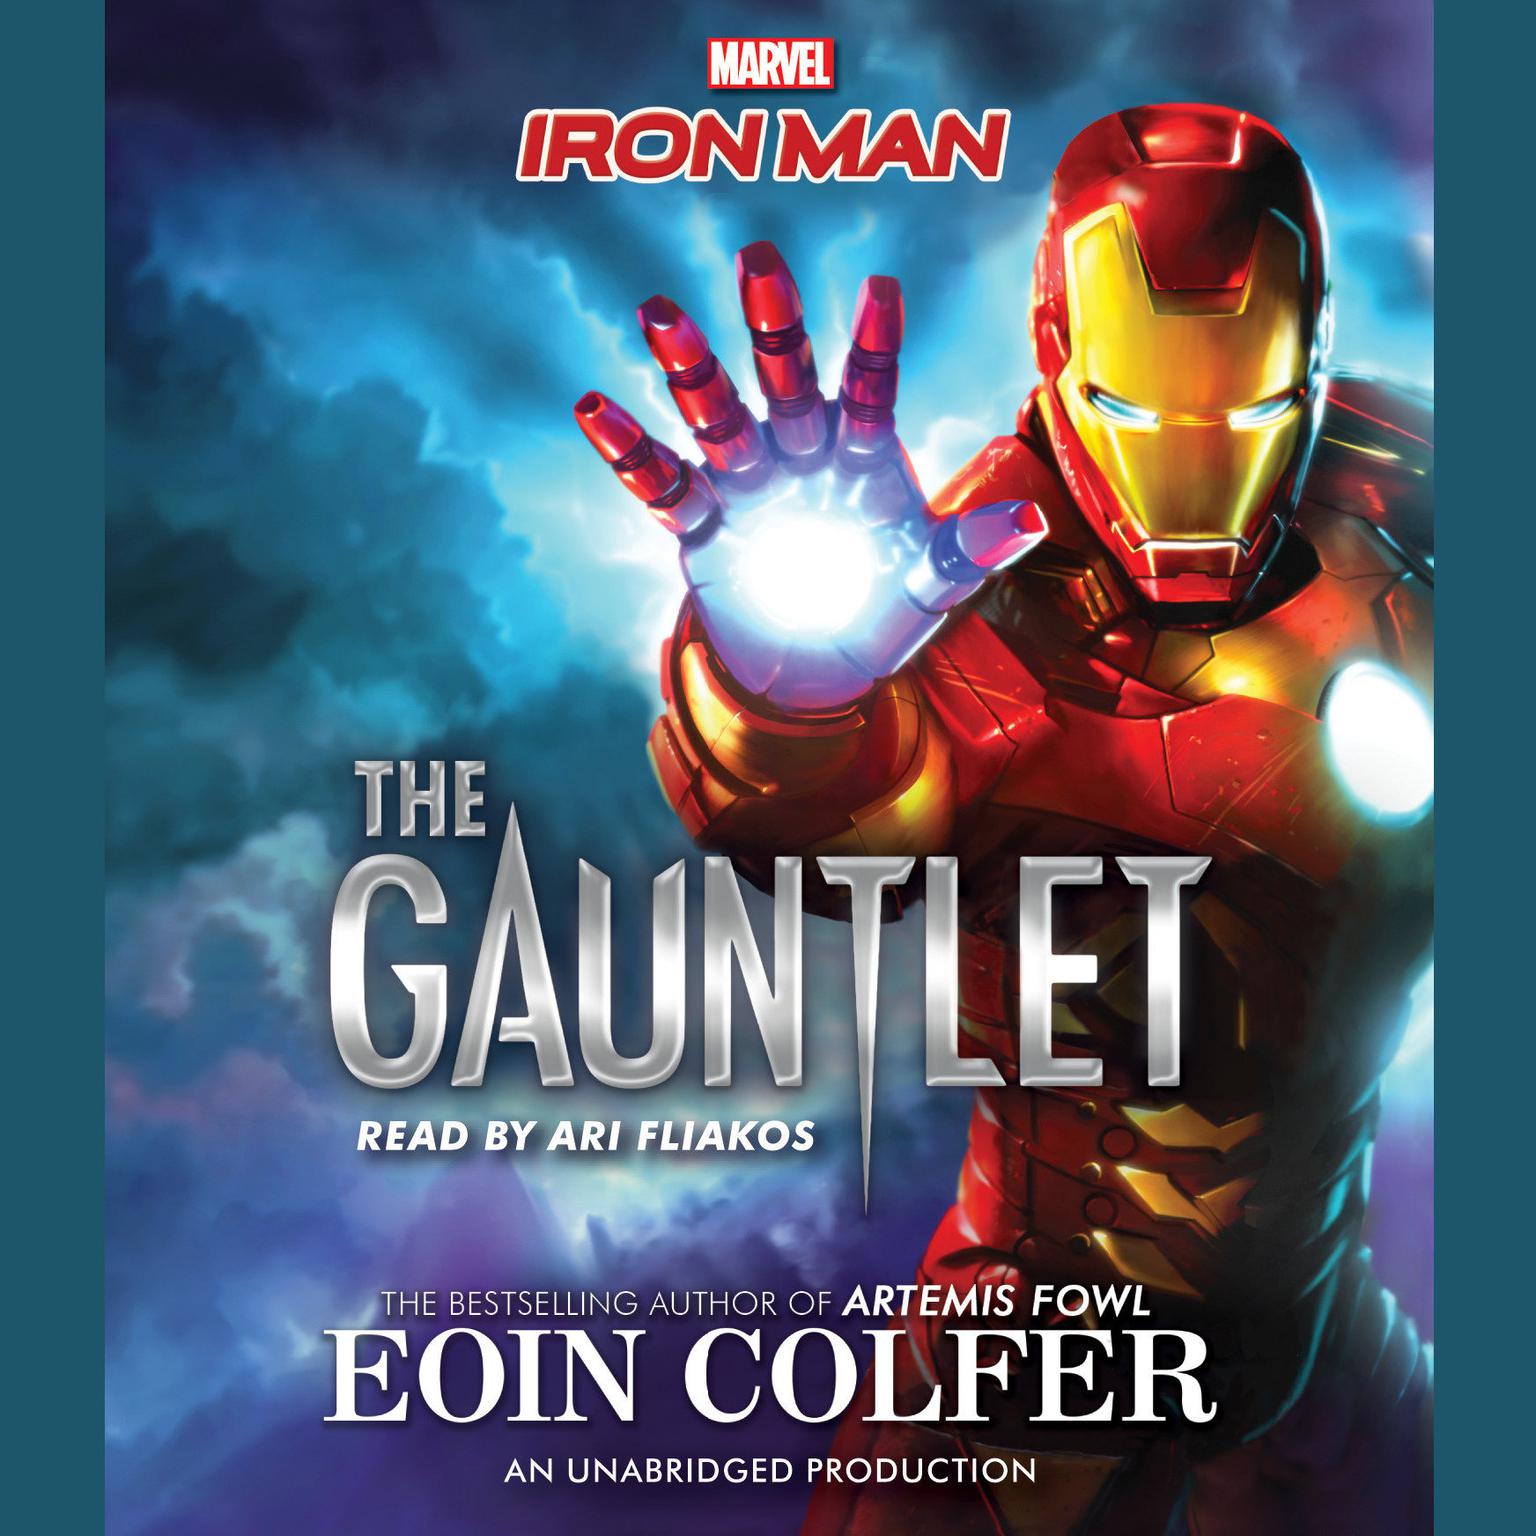 Iron Man: The Gauntlet Audiobook, by Eoin Colfer